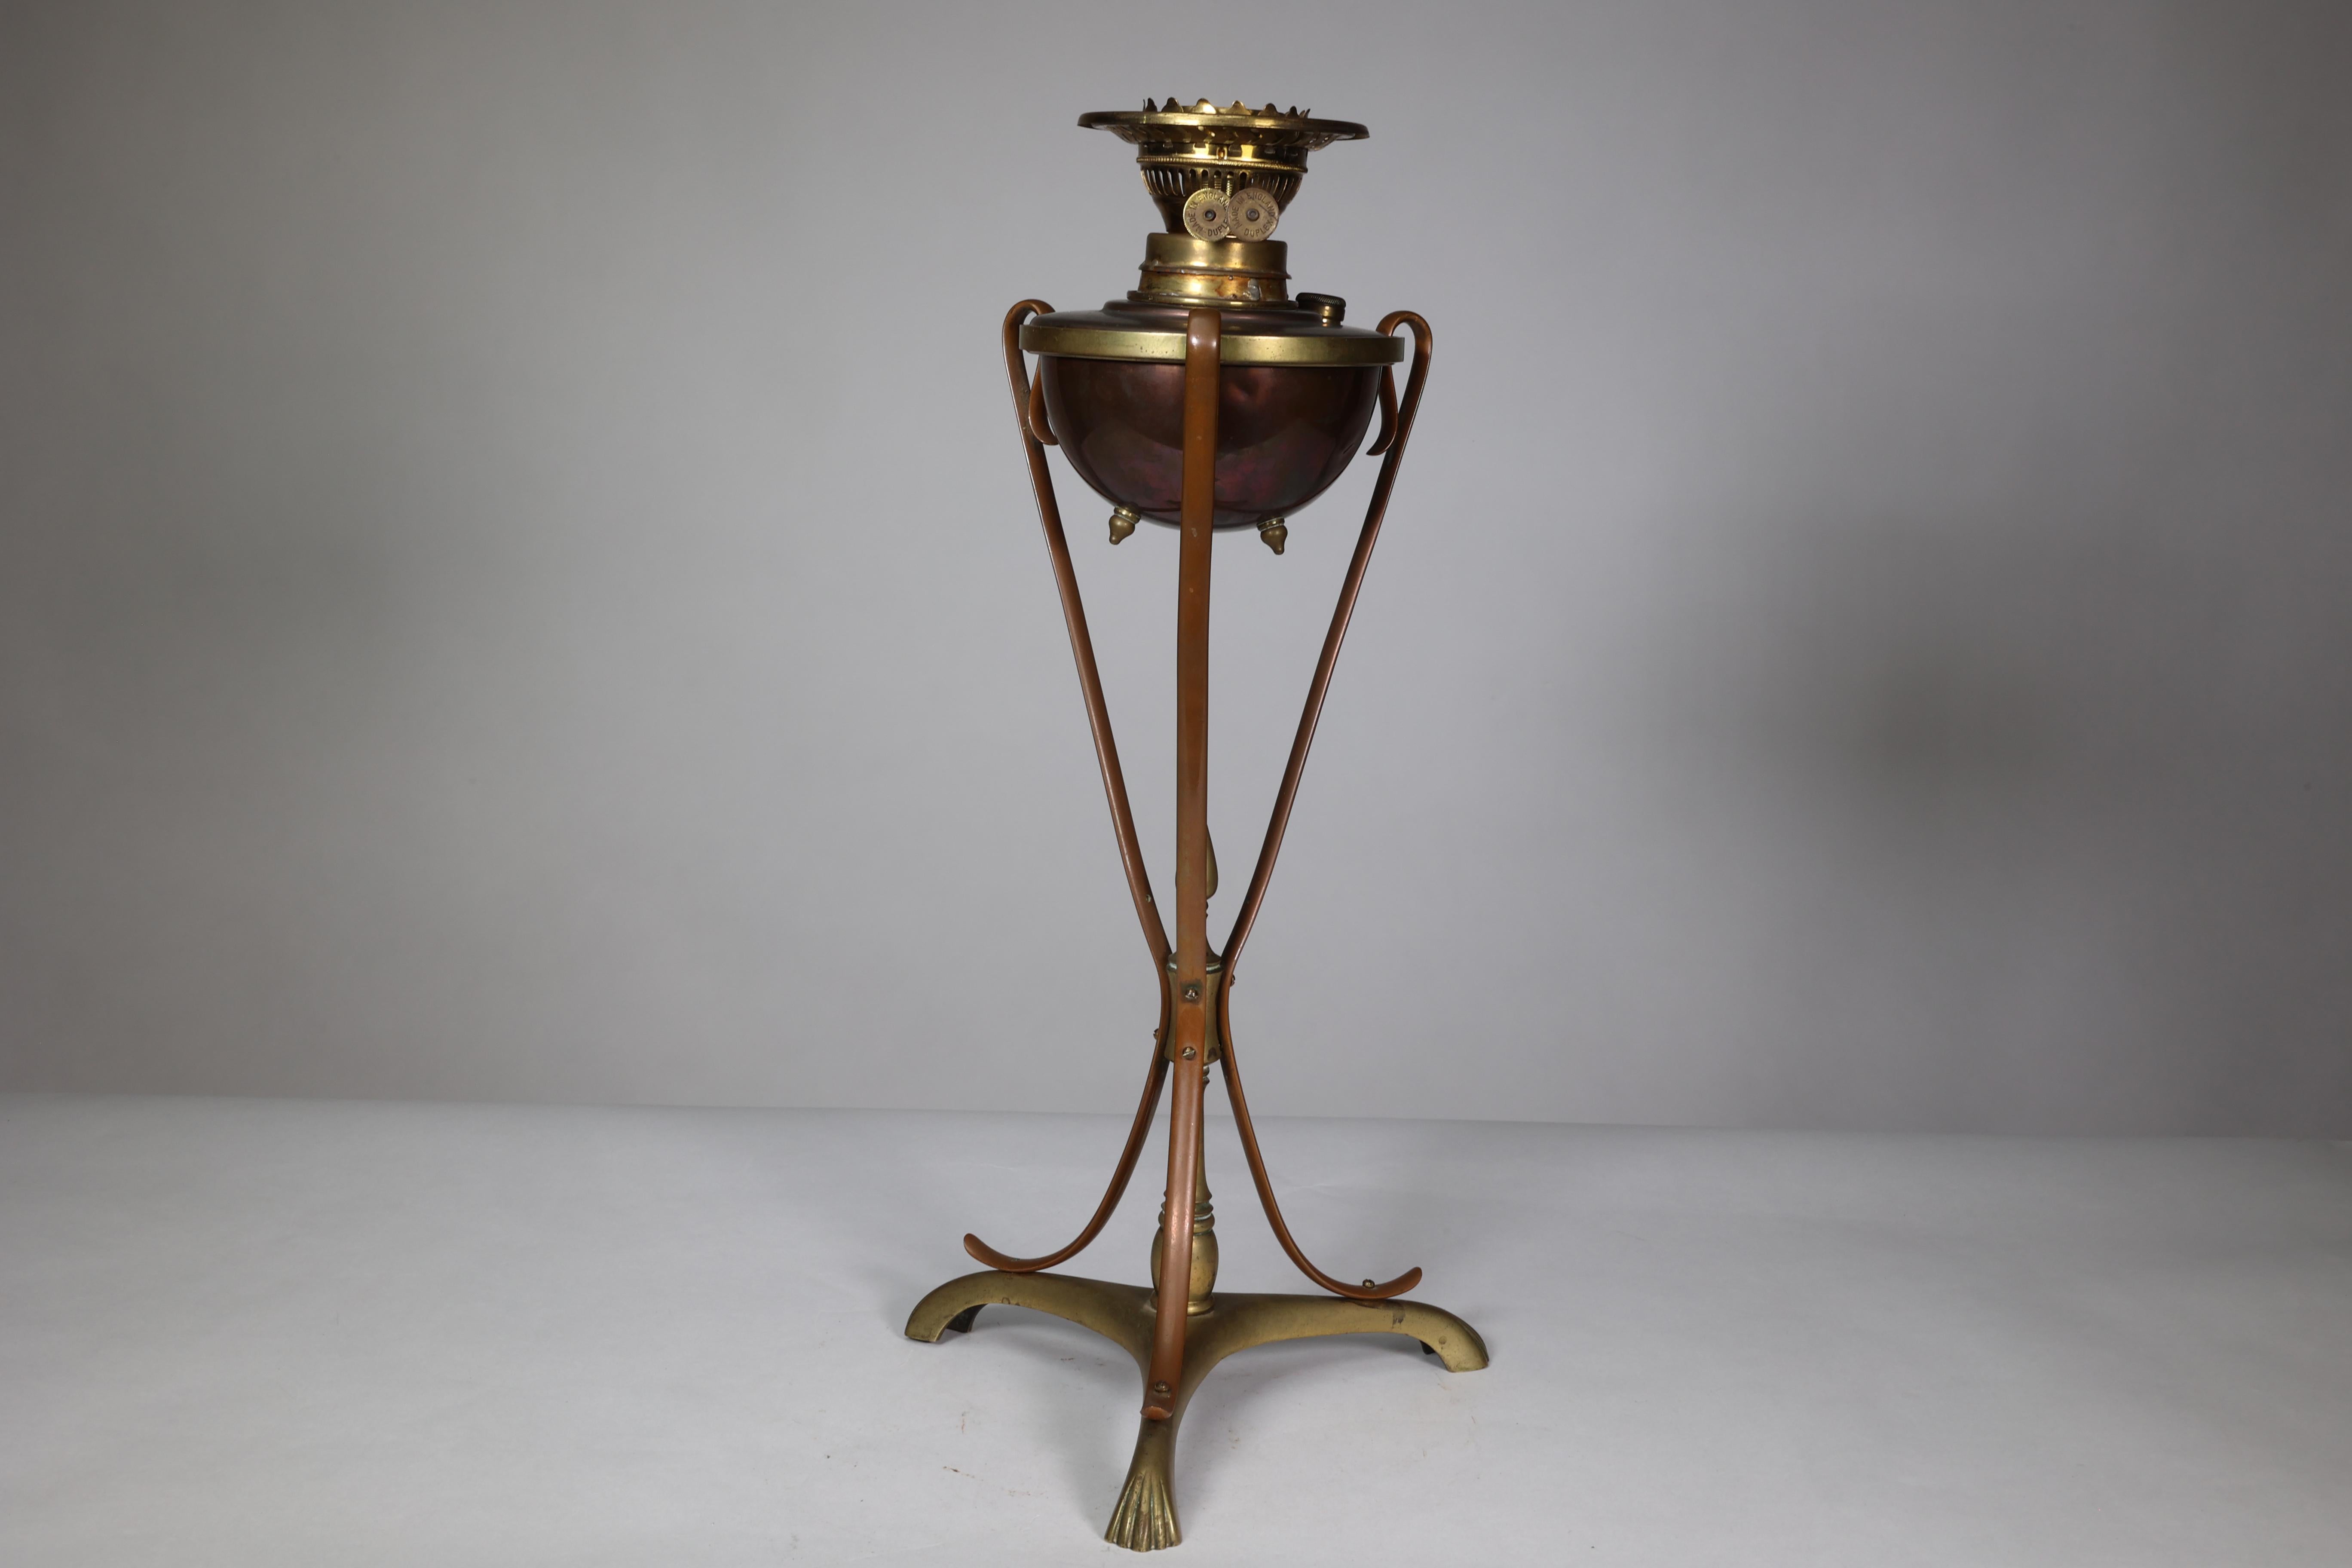 W A S Benson. An Arts and Crafts copper and brass oil lamp. WAS Benson Catalogue number 95.